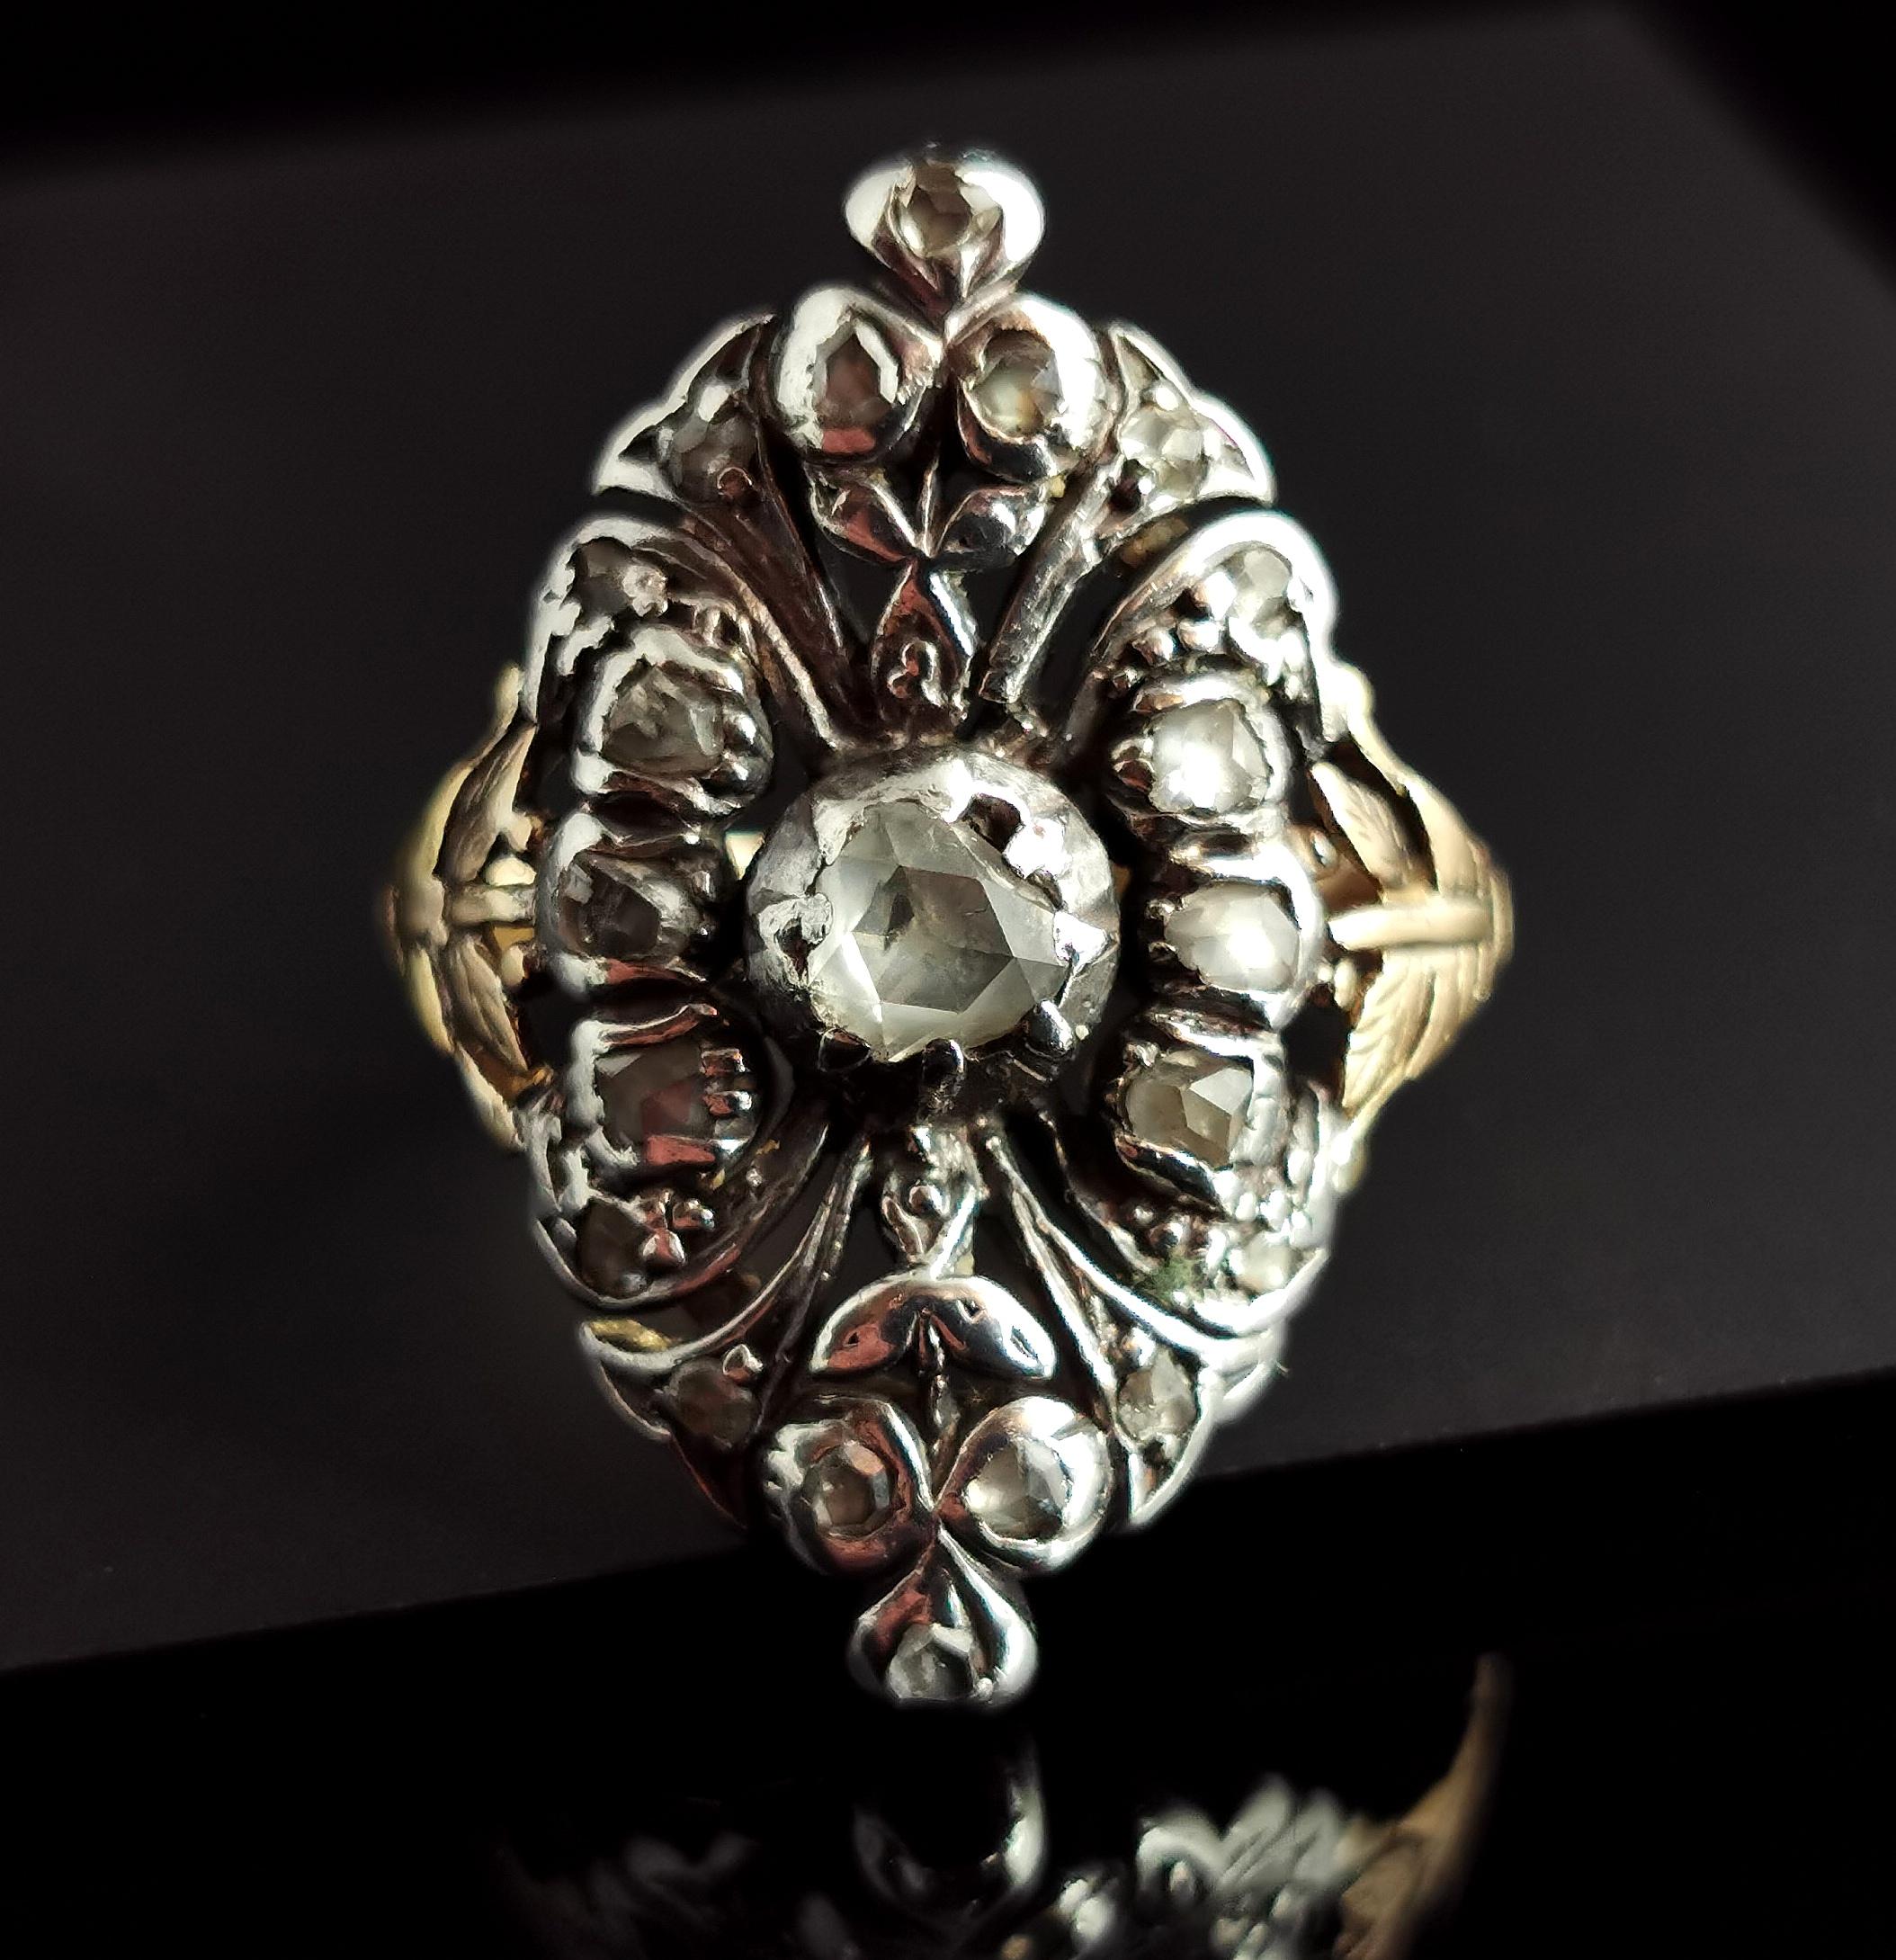 A truly spectacular Georgian era, late 18th century Giardinetti ring.

Giardinetti roughly translates to little garden, these wonderfully designed rings often depicted floral displays or flower baskets with naturalistic shapes and themes, like